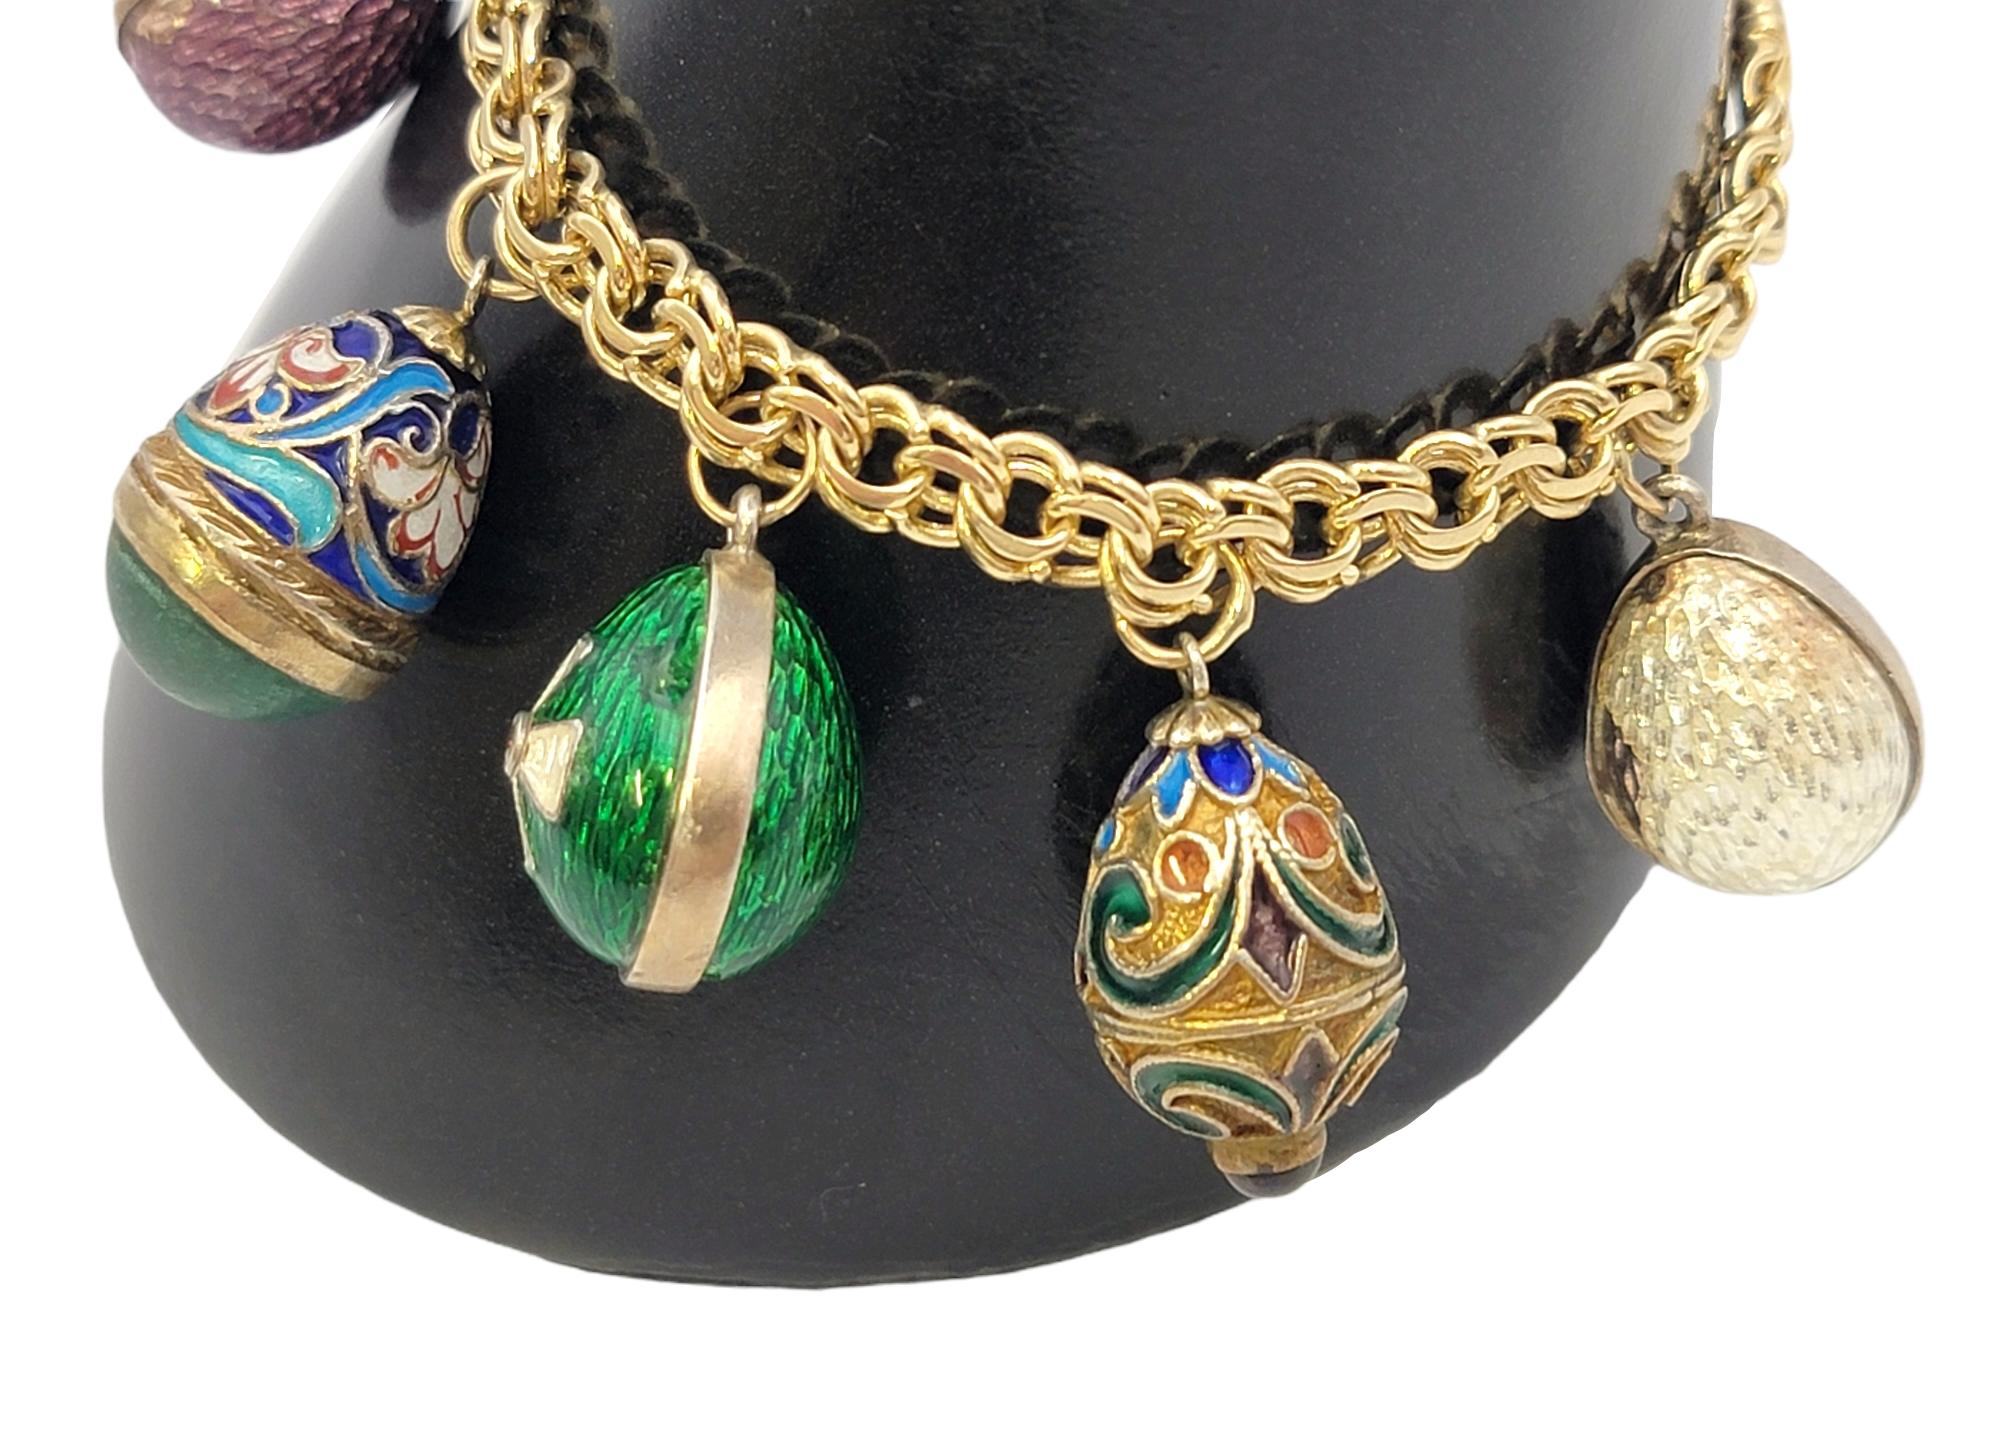 Vintage 14 Karat Yellow Gold Charm Bracelet with 7 Colorful Enamel Egg Charms For Sale 2